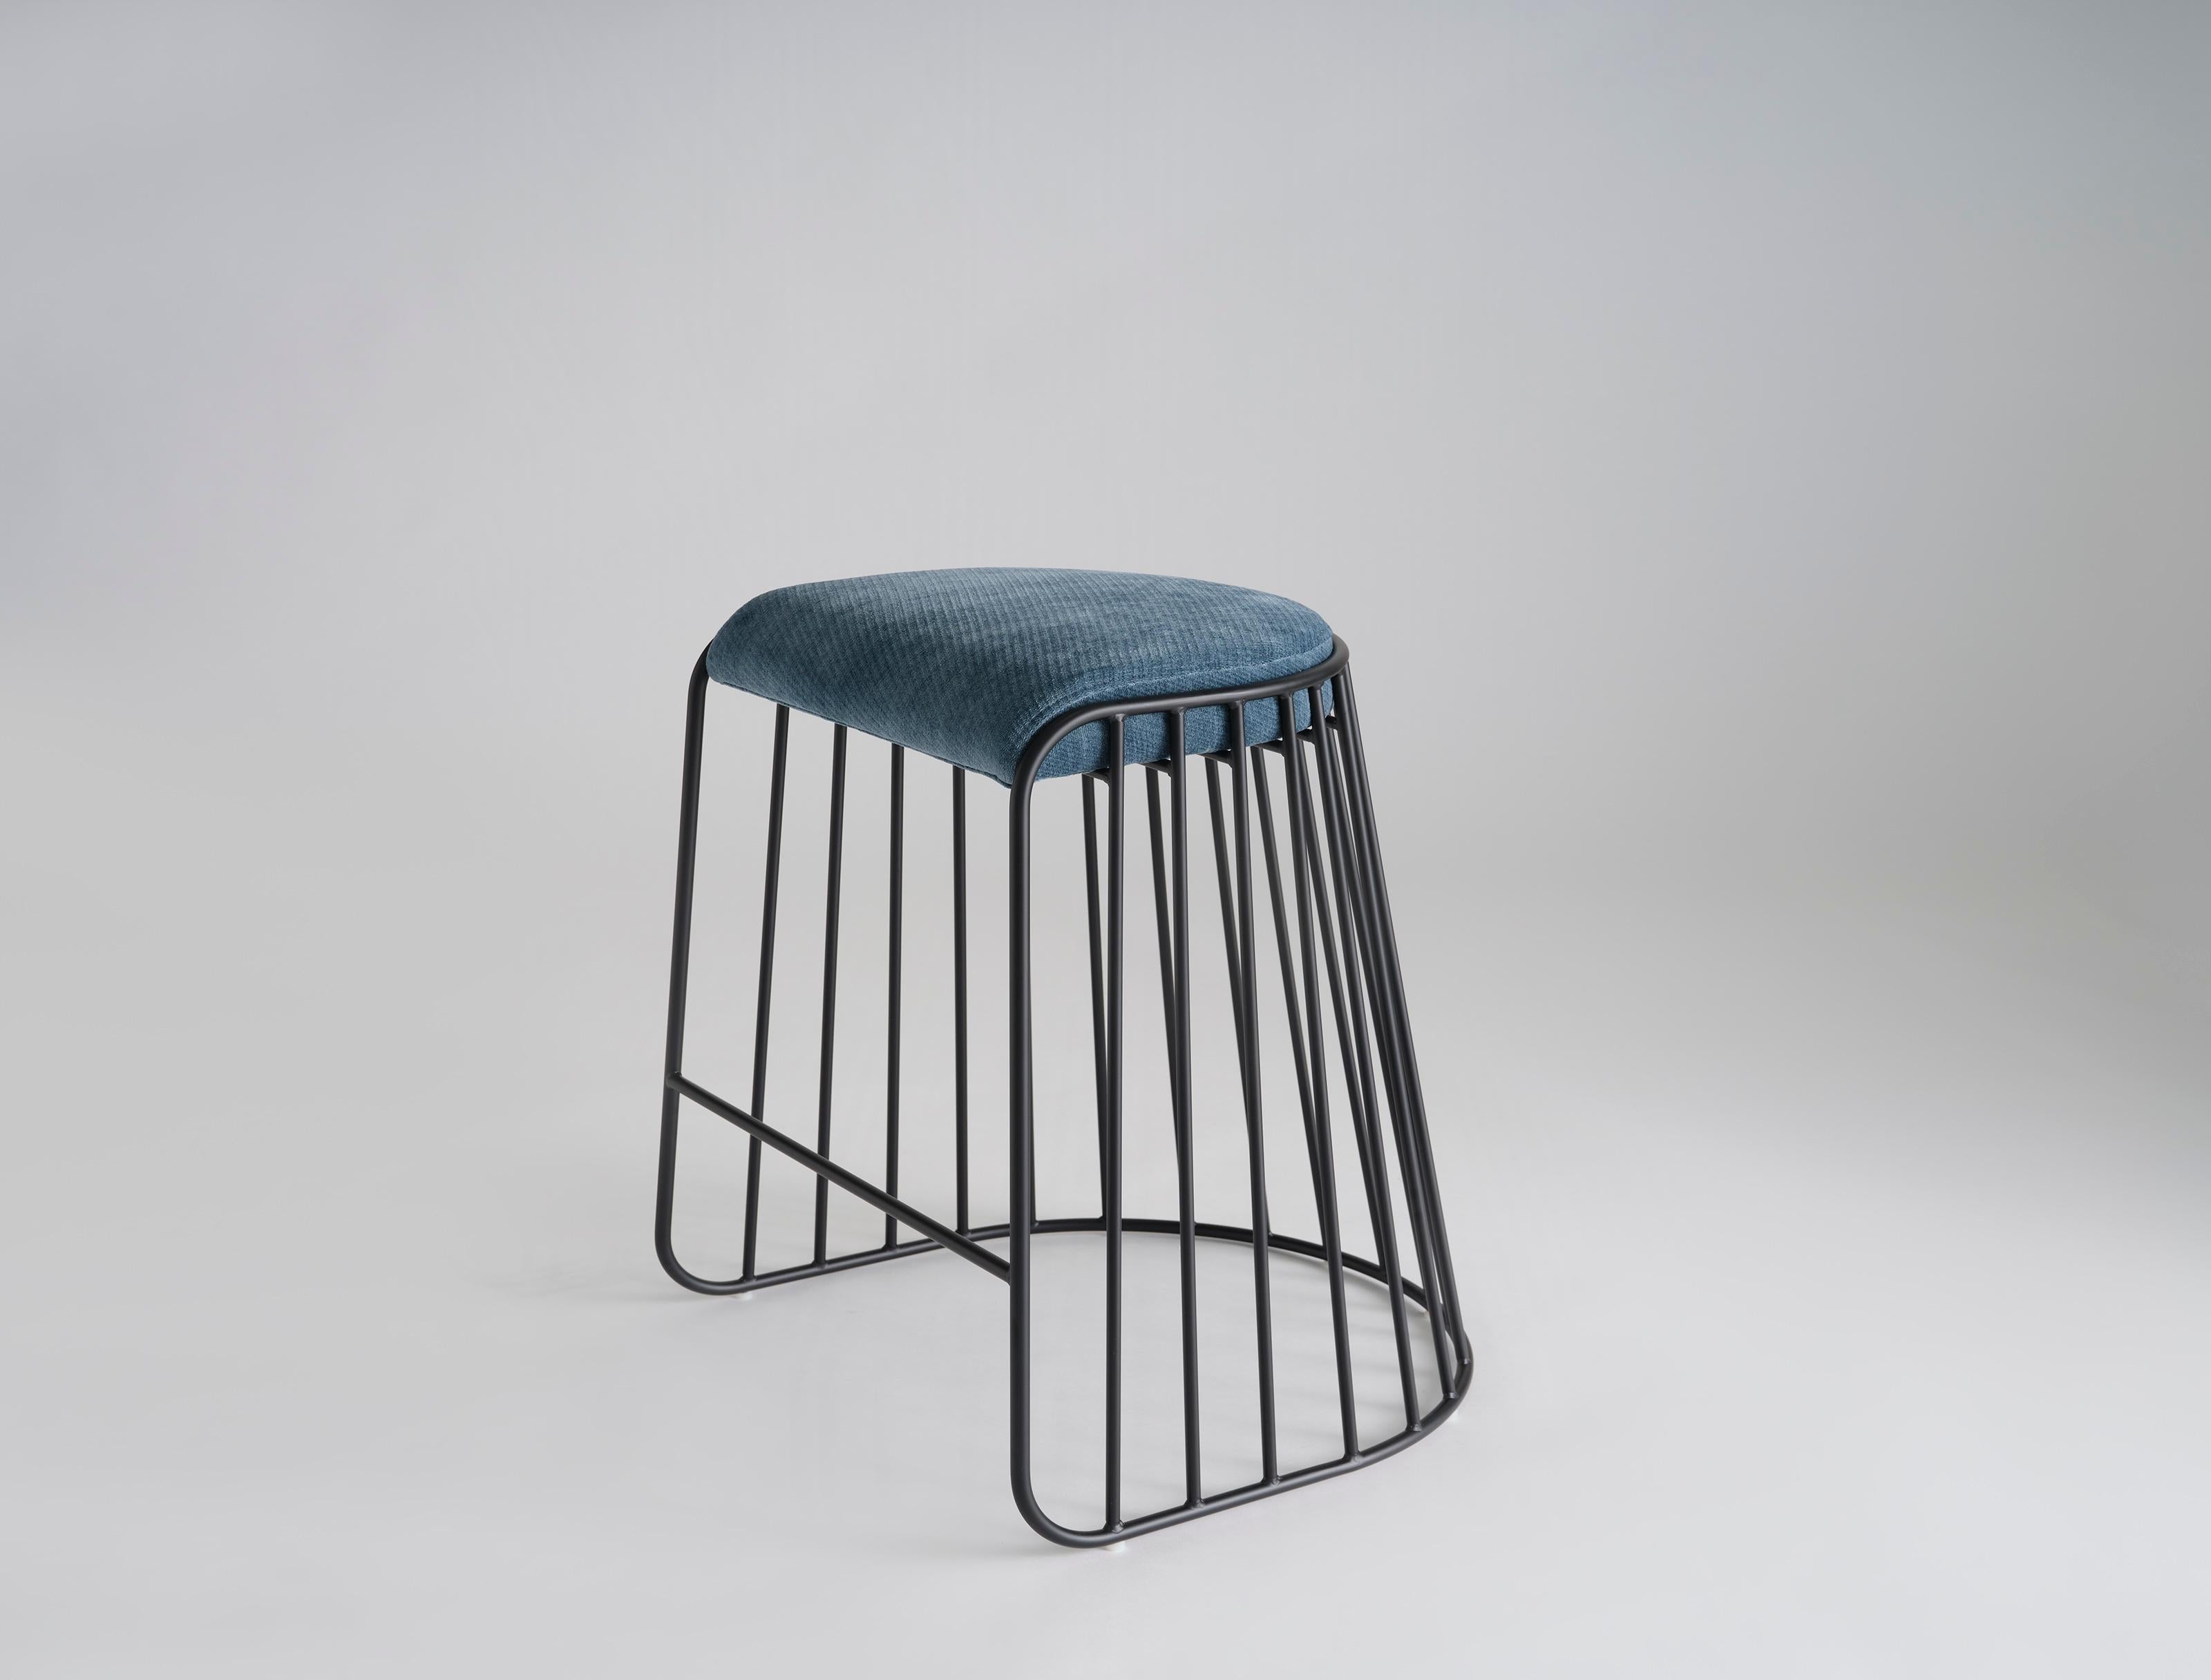 Bride’s Veil Counter Stool by Phase Design
Dimensions: D 52,1 x W 53,3 x H 63,5 cm.
Materials: Upholstery and powder-coated steel.

Solid steel bar available in a smoked brass, polished chrome, burnt copper, or powder coat finish with upholstered